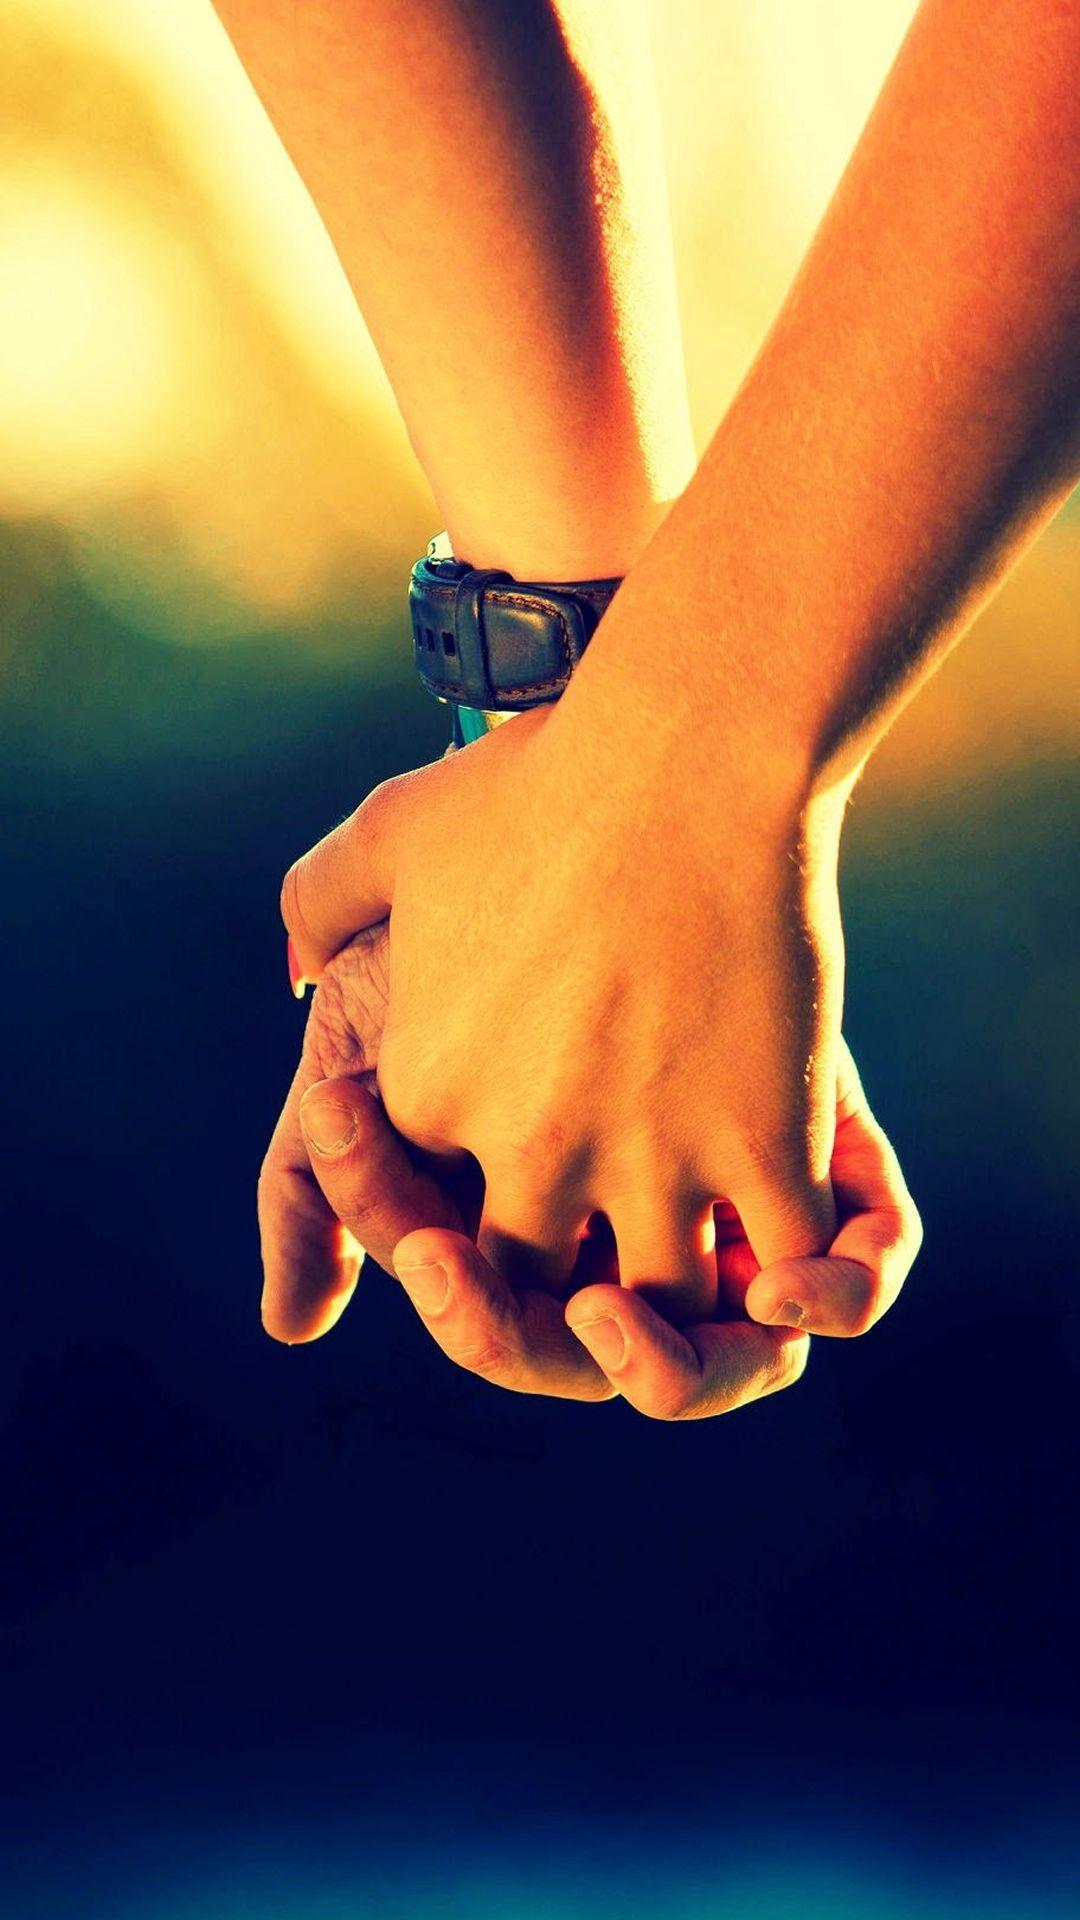 Couple holding hands, Hand wallpaper .in.com